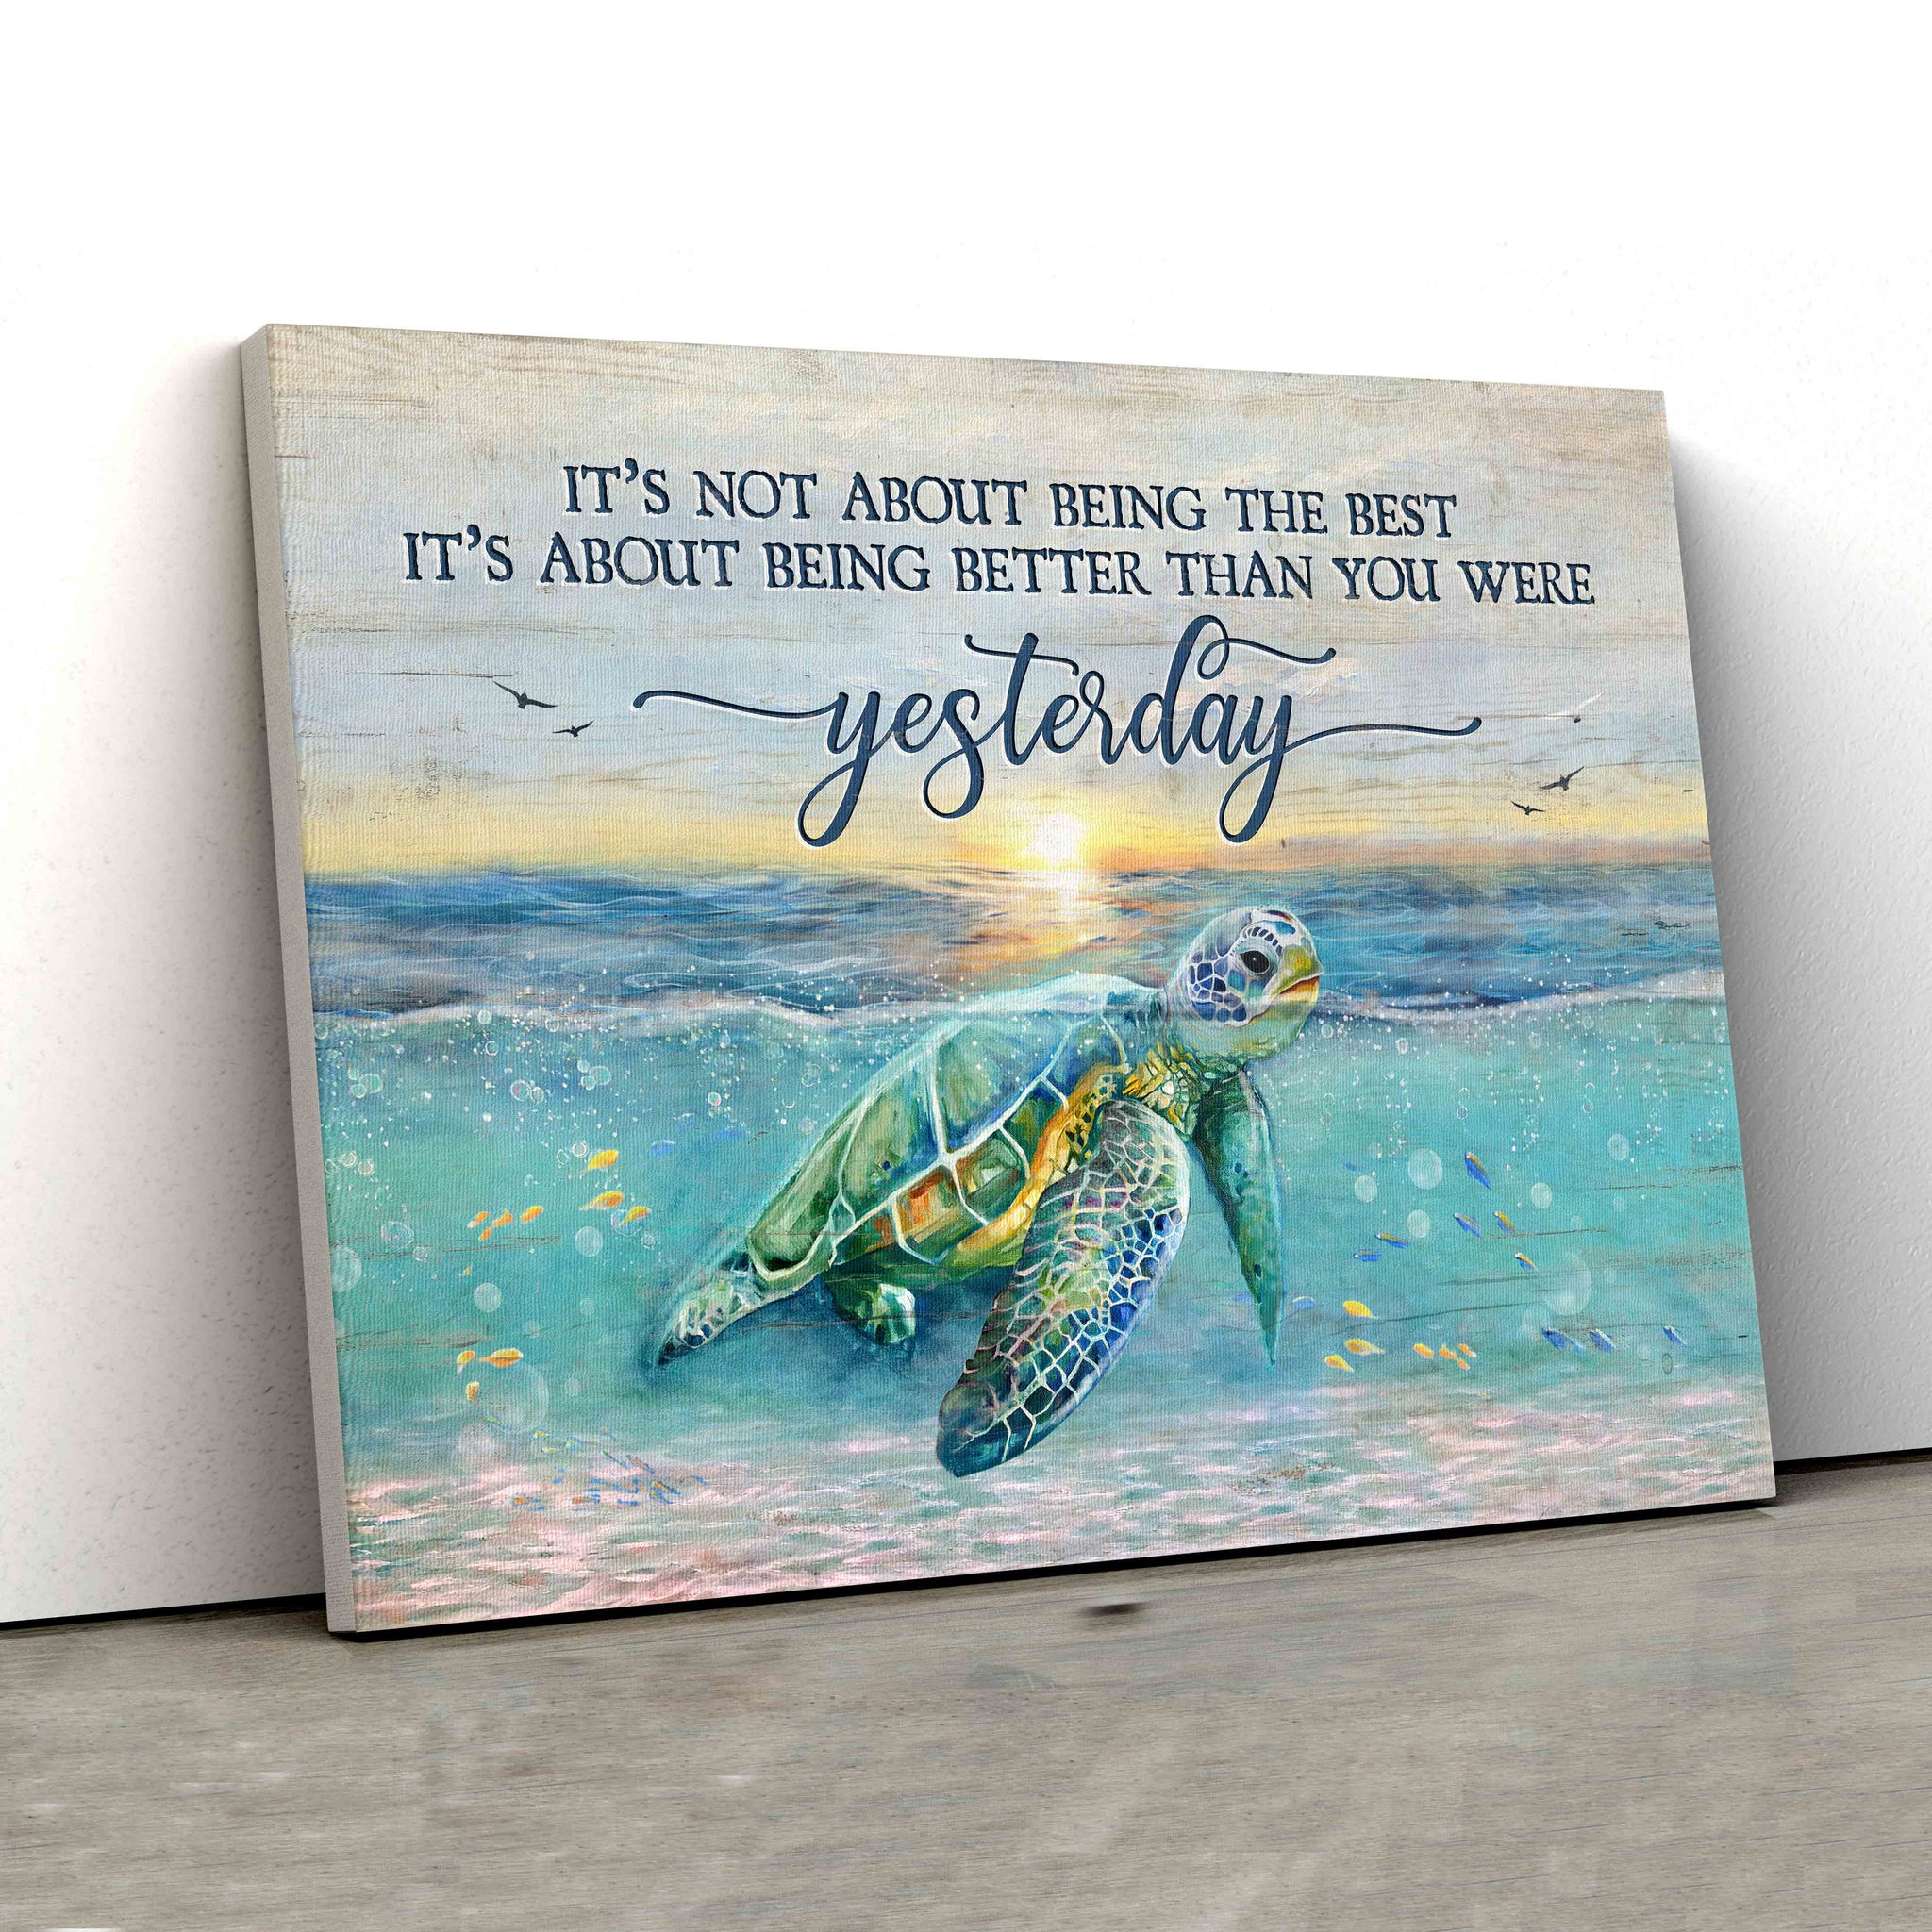 It's About Being Better Than You Were Yesterday Canvas, Turtle Canvas, Ocean Canvas, Canvas Wall Art